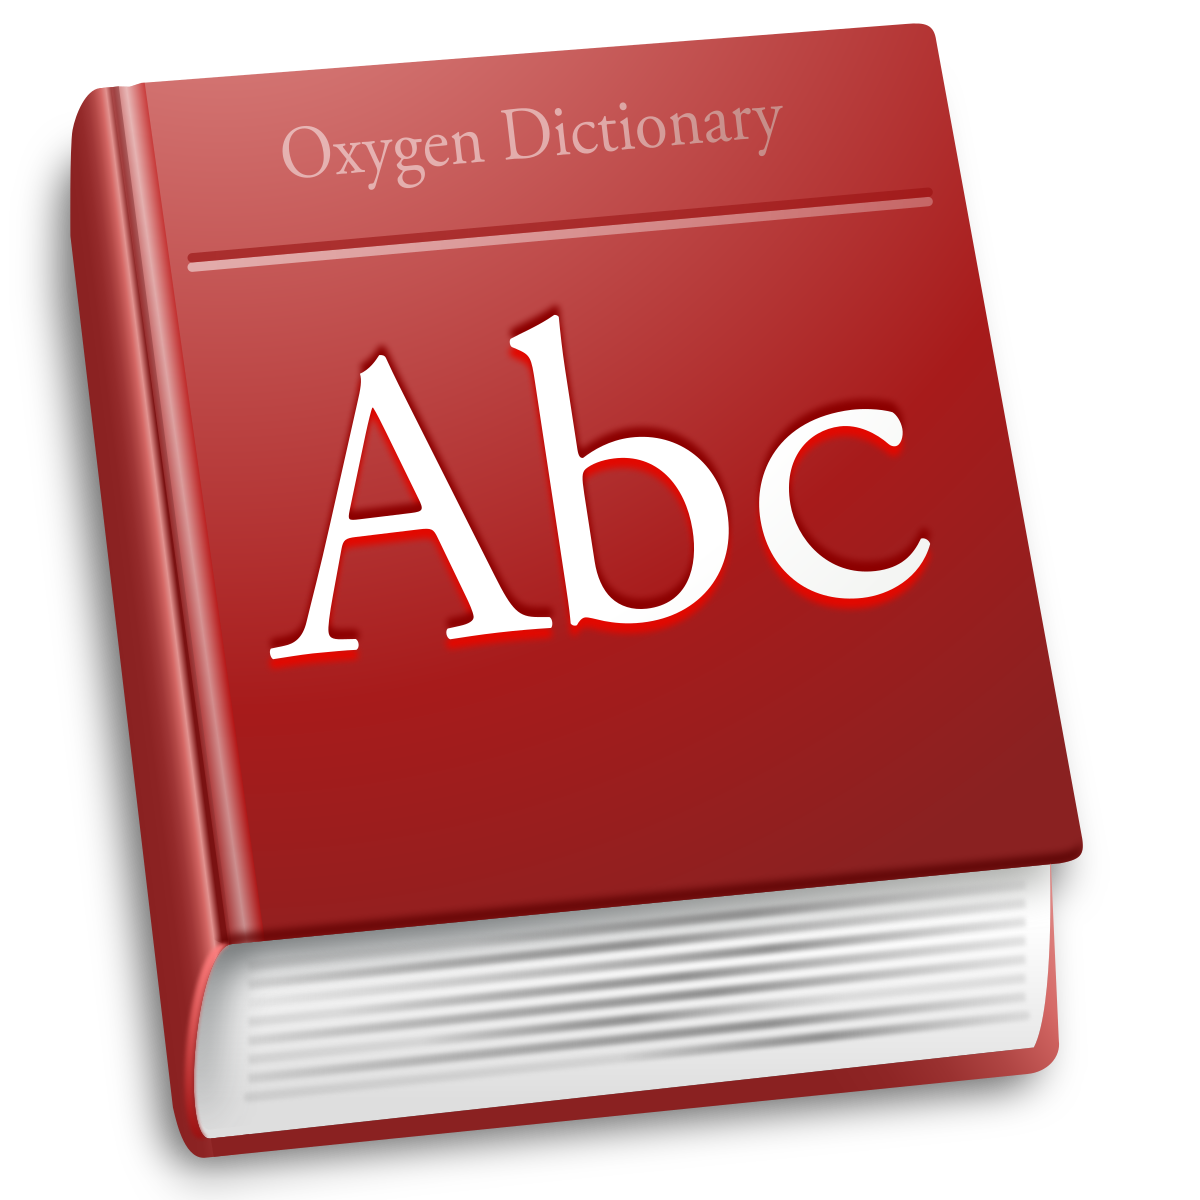 File:Oxygen480-actions-draw-eraser.svg - Wikimedia Commons